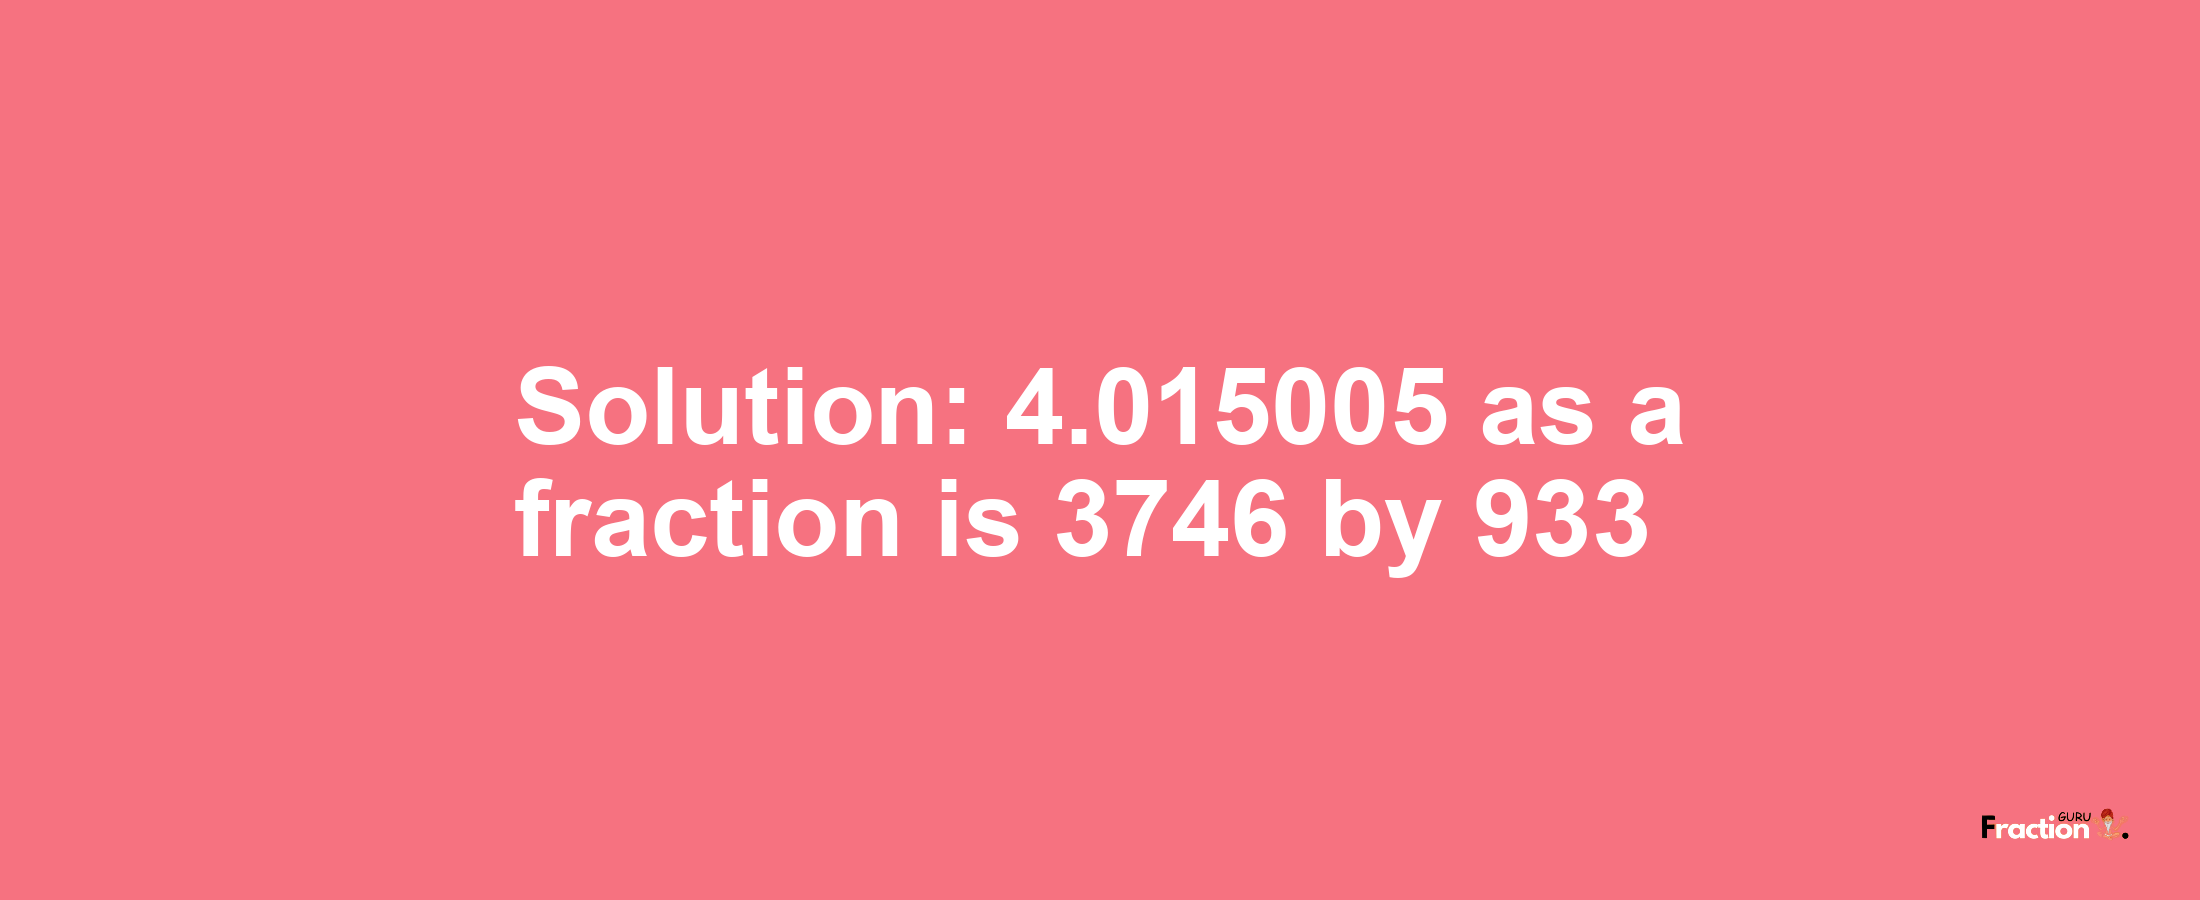 Solution:4.015005 as a fraction is 3746/933